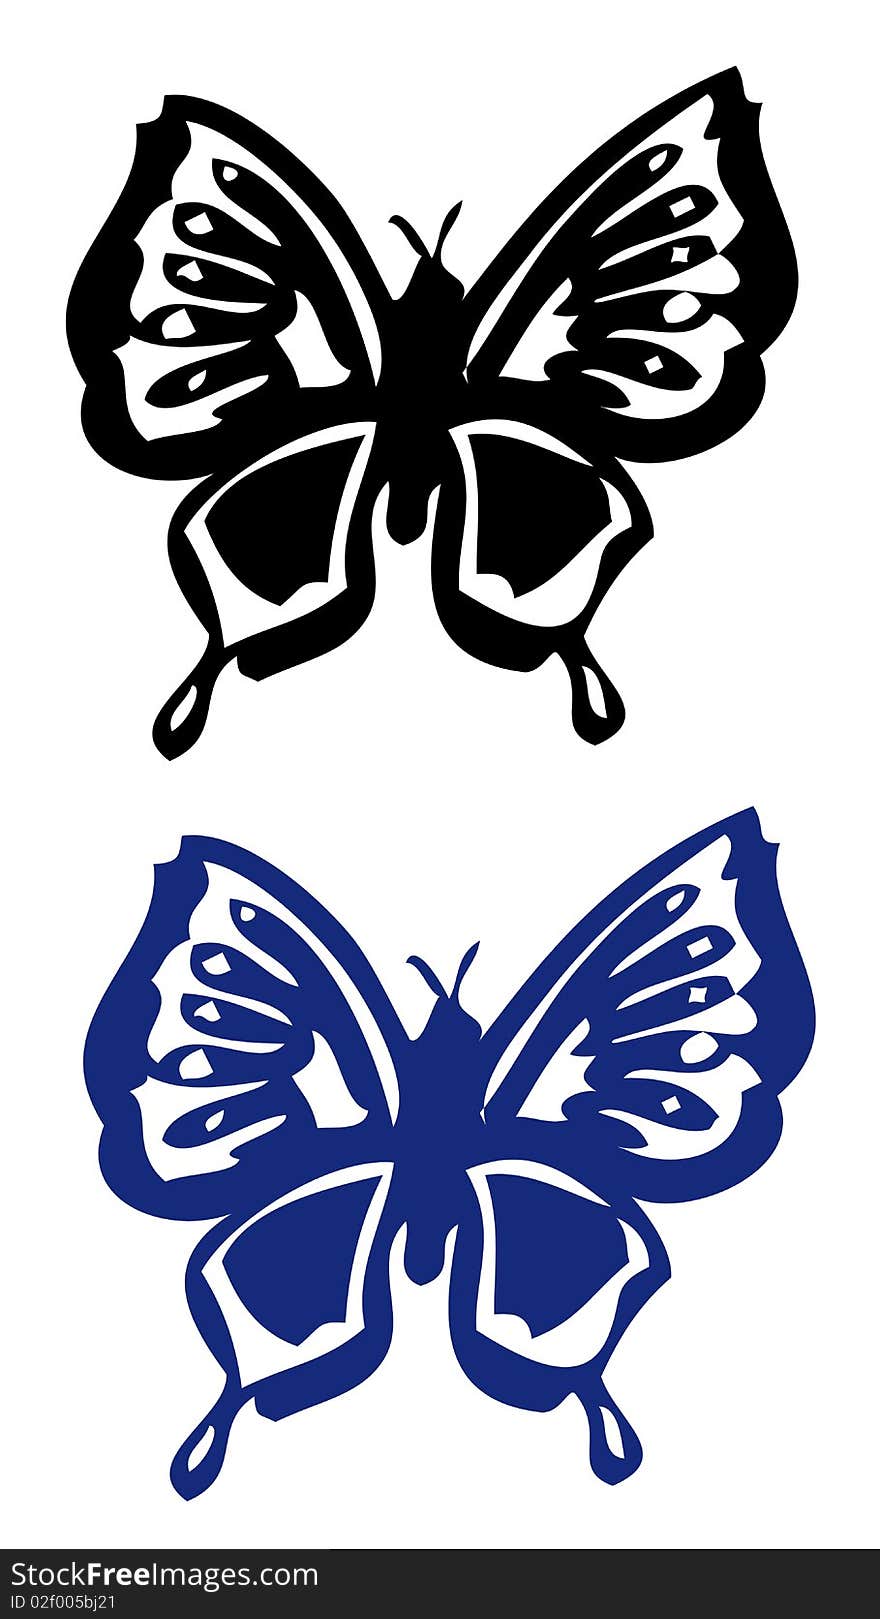 Drawing of blue butterfly and black butterfly